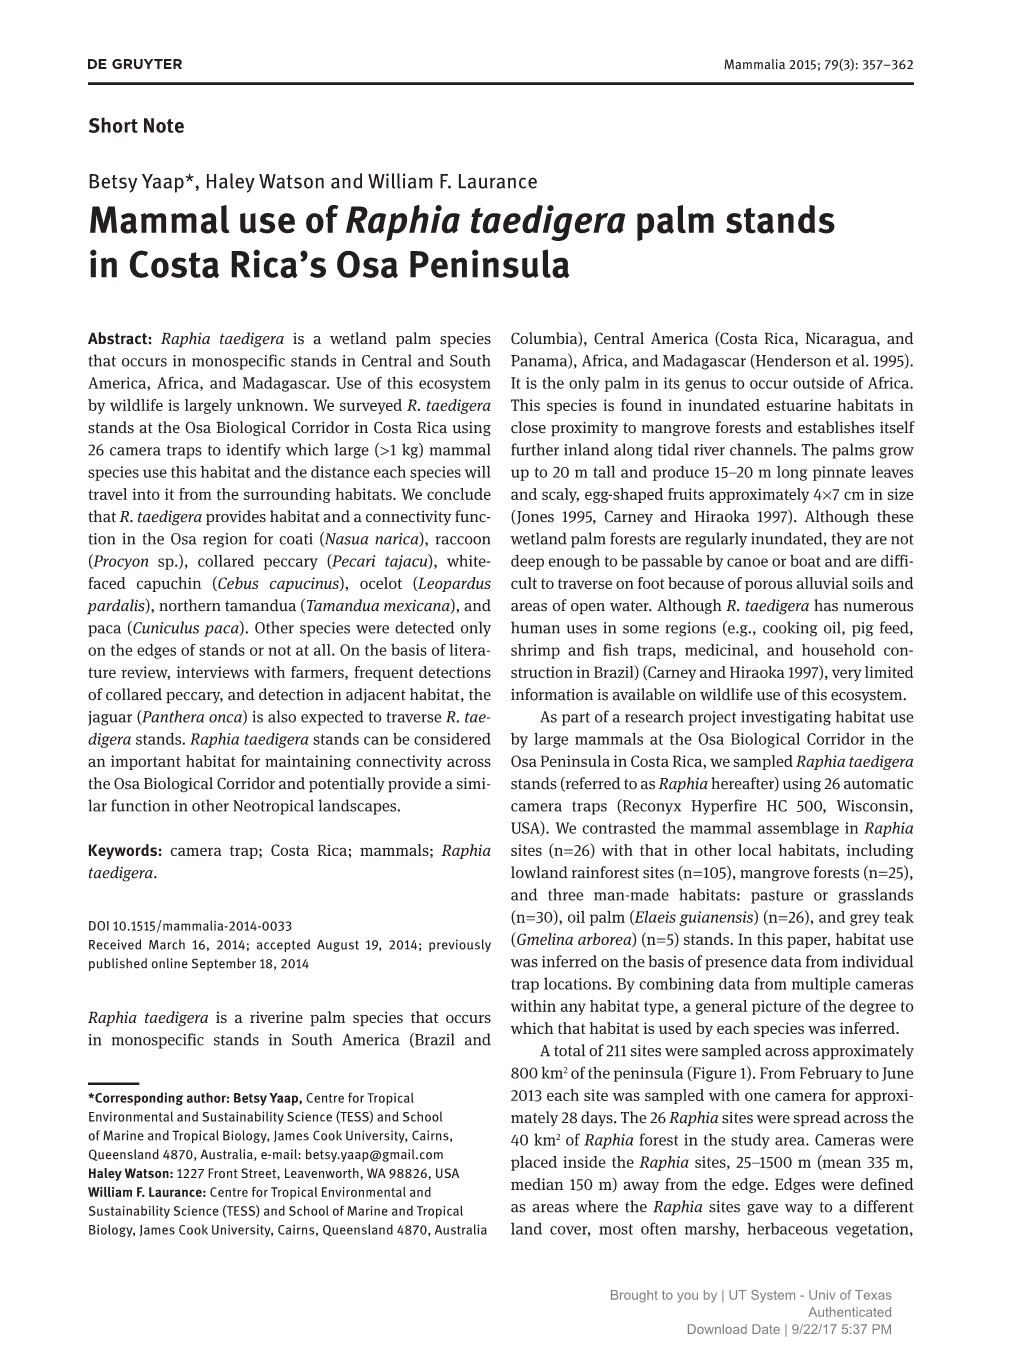 Mammal Use of Raphia Taedigera Palm Stands in Costa Rica's Osa